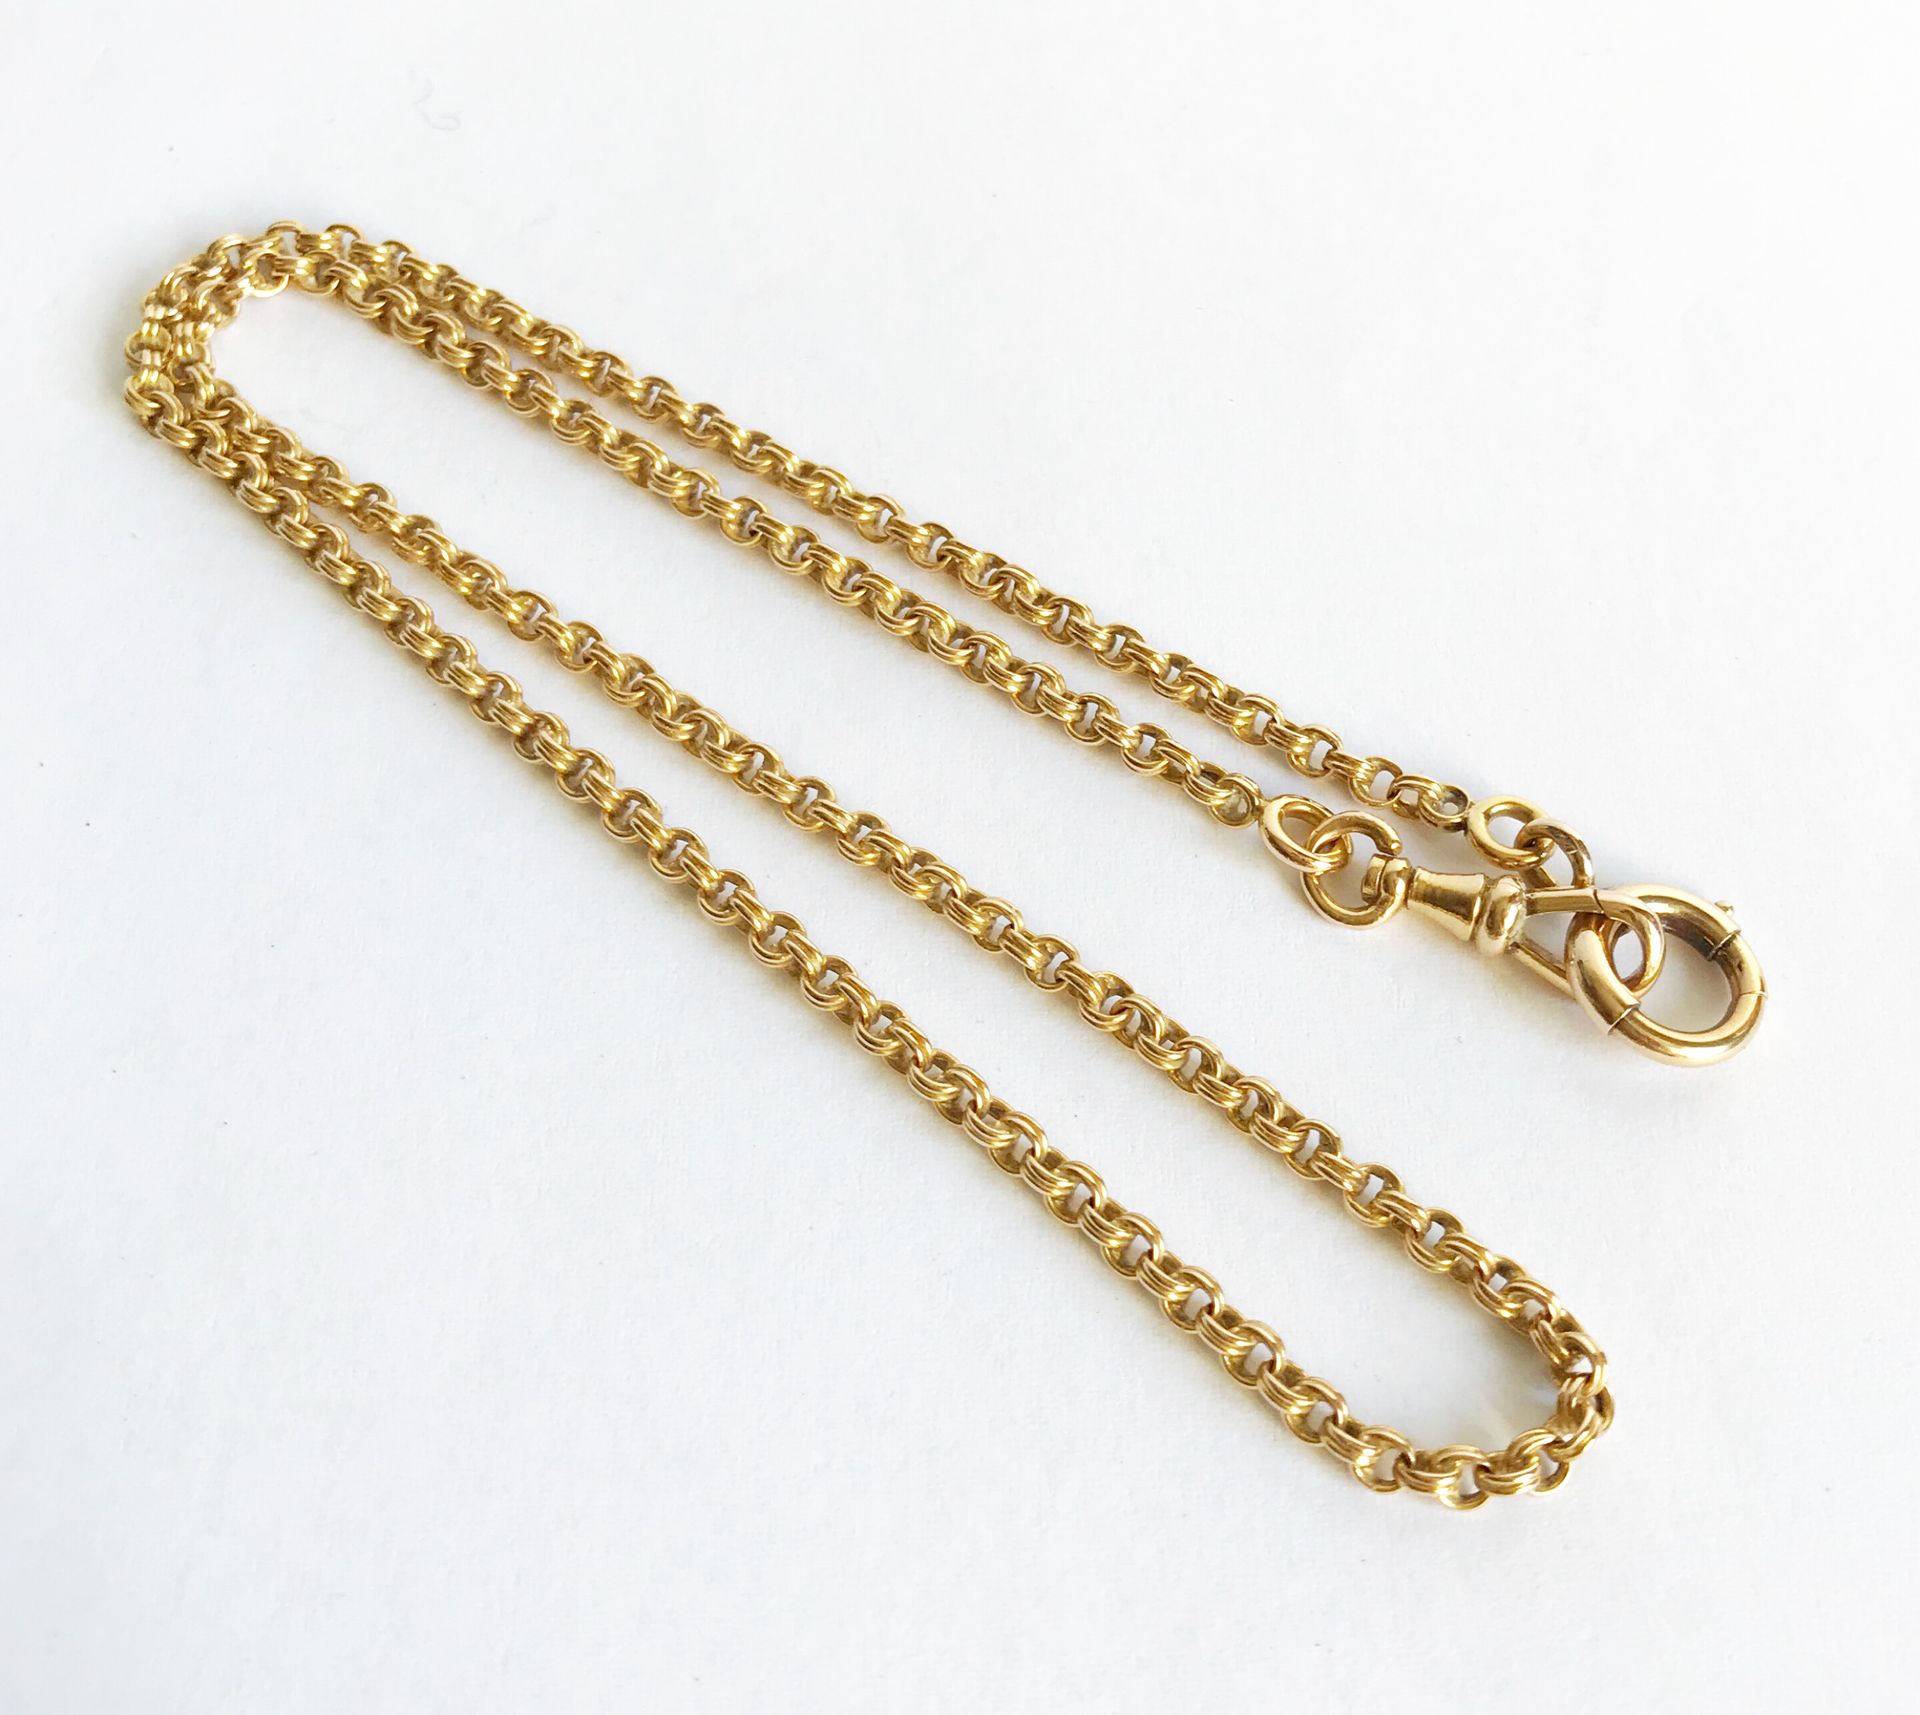 Null Yellow gold watch chain (18K/750th) with double links.
Weight : 12,35 g.